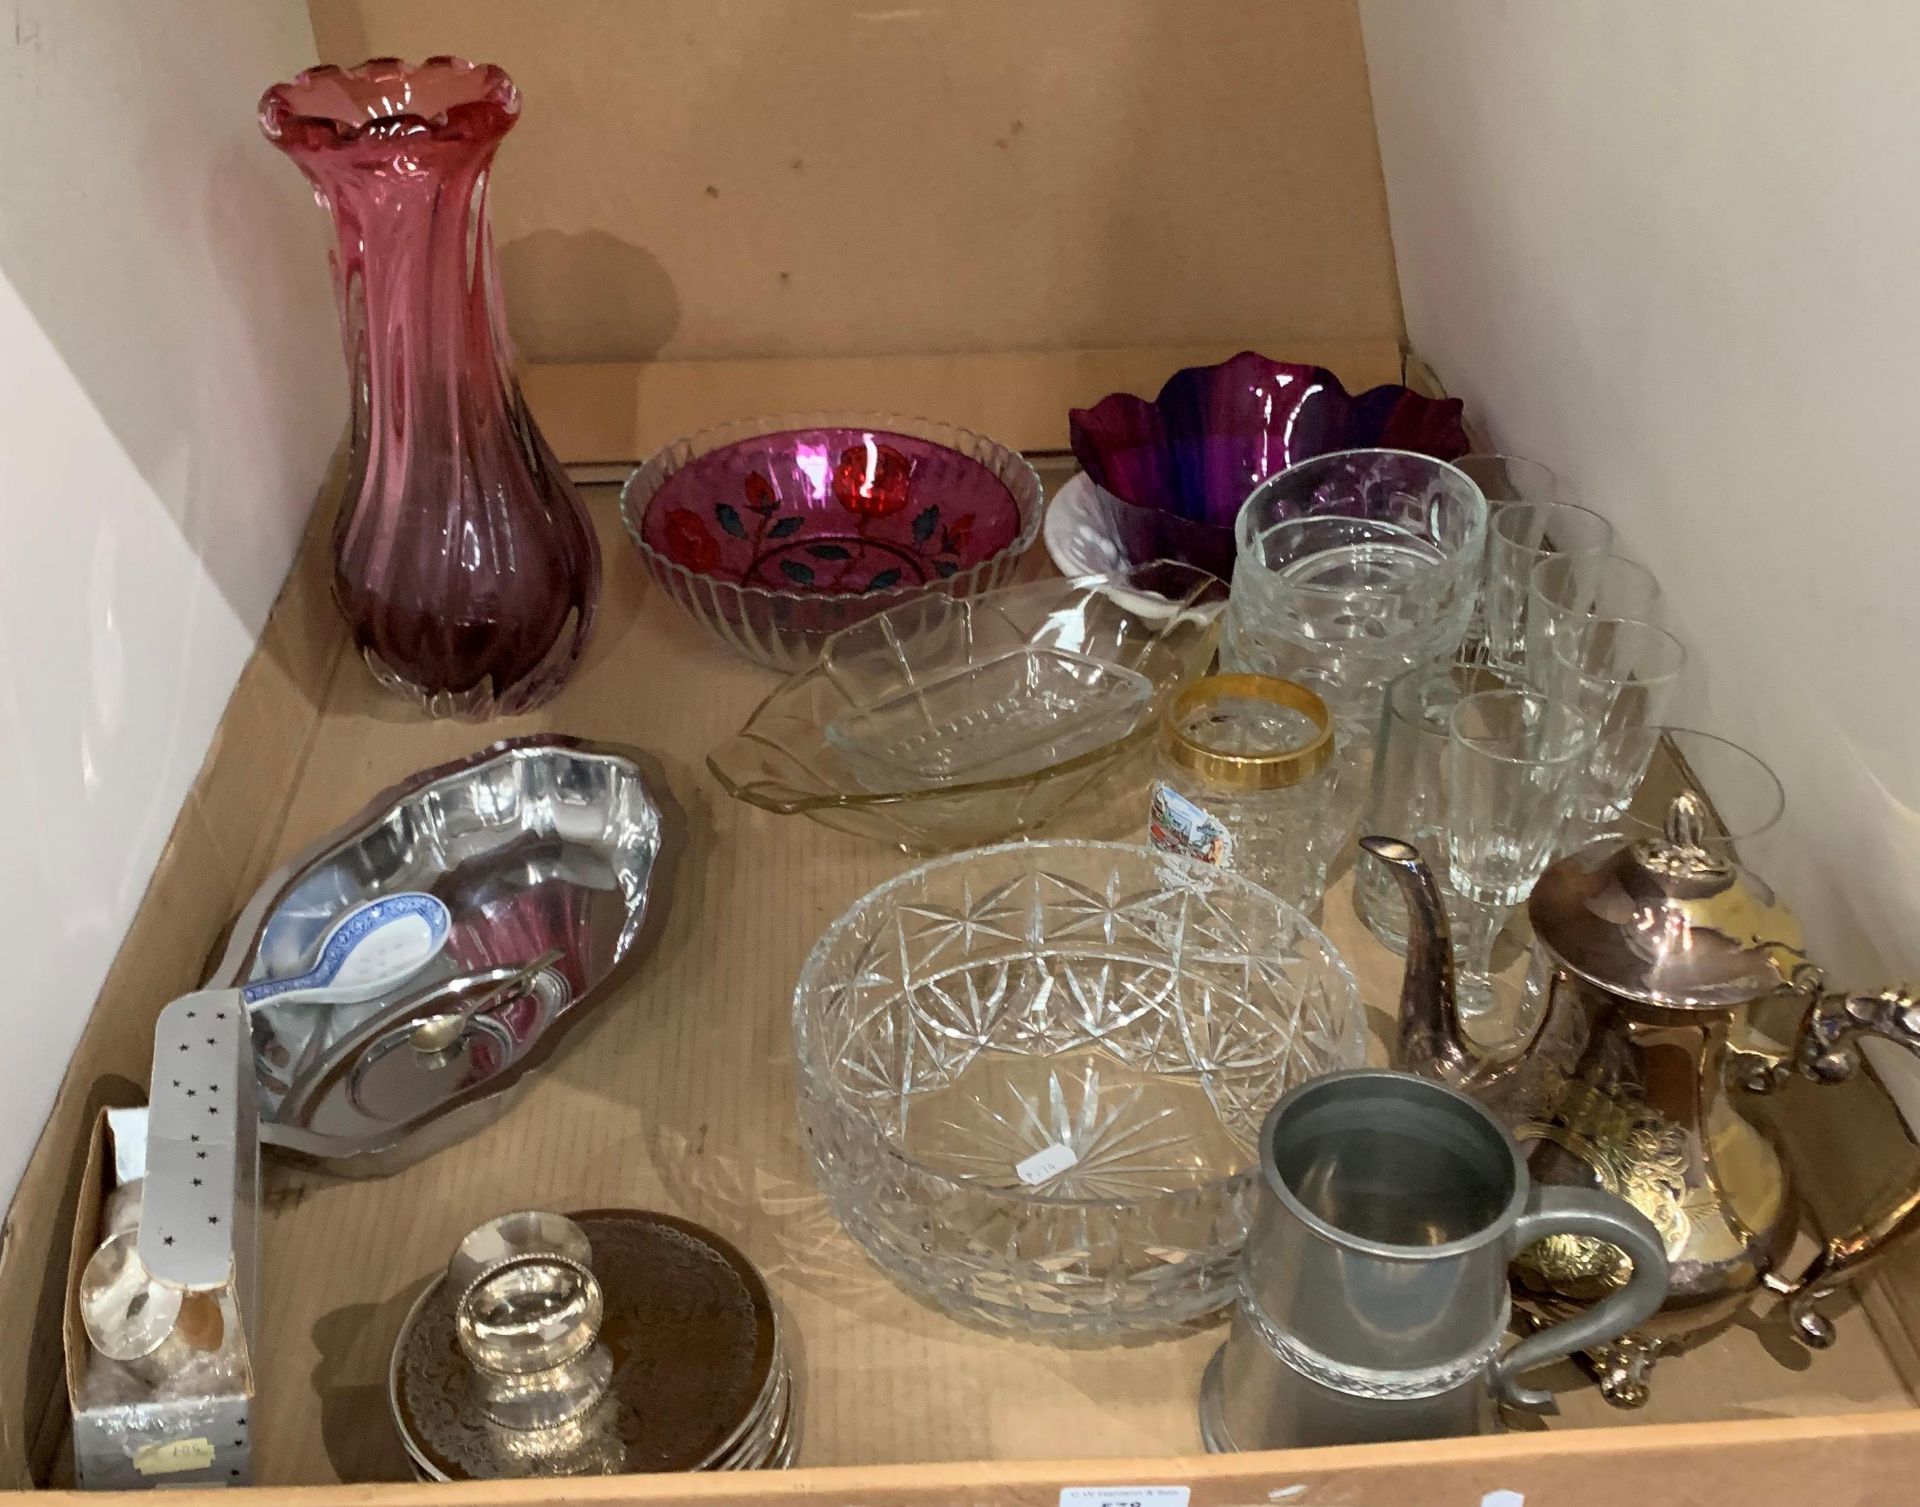 Contents to tray - glass bowls, vase, plated coffee pot etc.